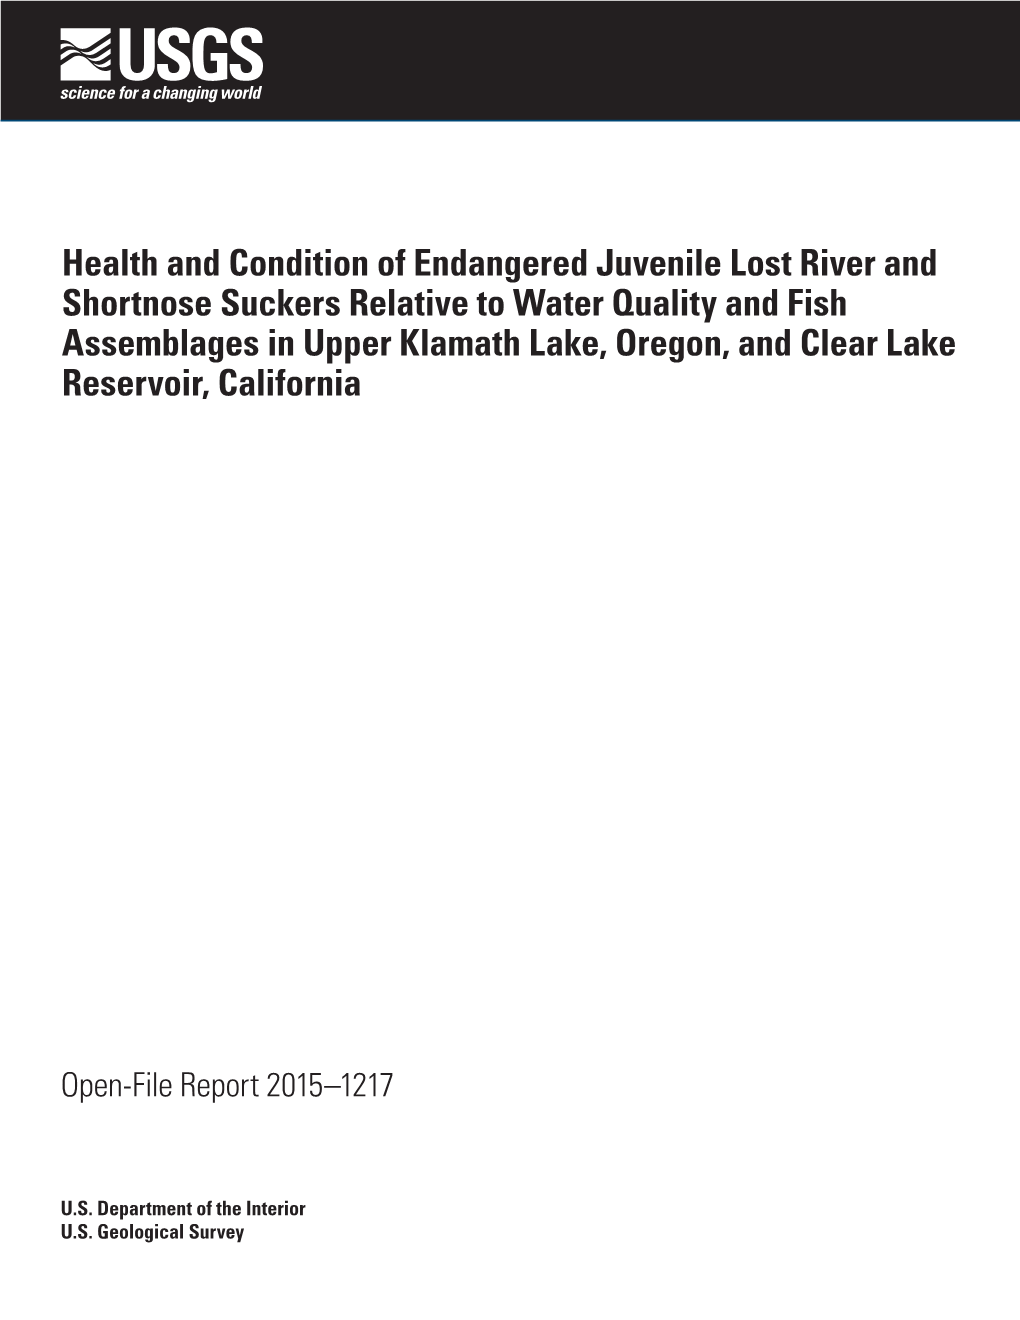 Health and Condition of Endangered Juvenile Lost River and Shortnose Suckers Relative to Water Quality and Fish Assemblages In